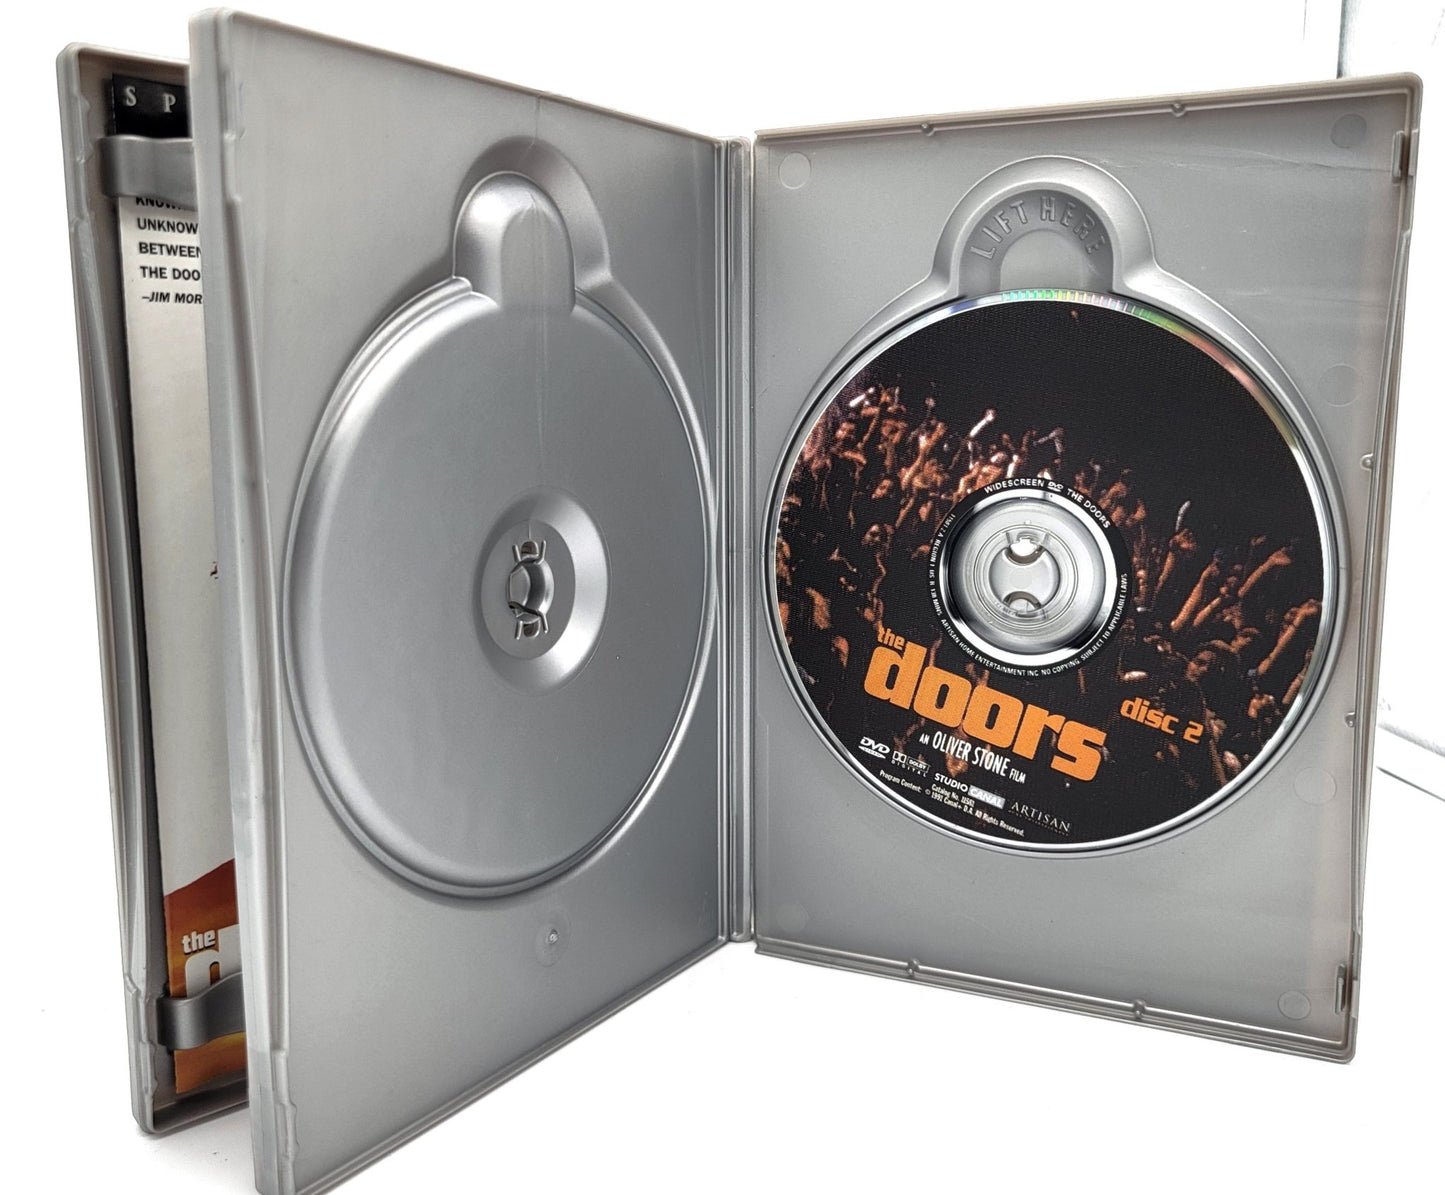 Lionsgate Home Entertainment - The Doors | DVD | Special Edition - 2 Disc Set - DVD - Steady Bunny Shop